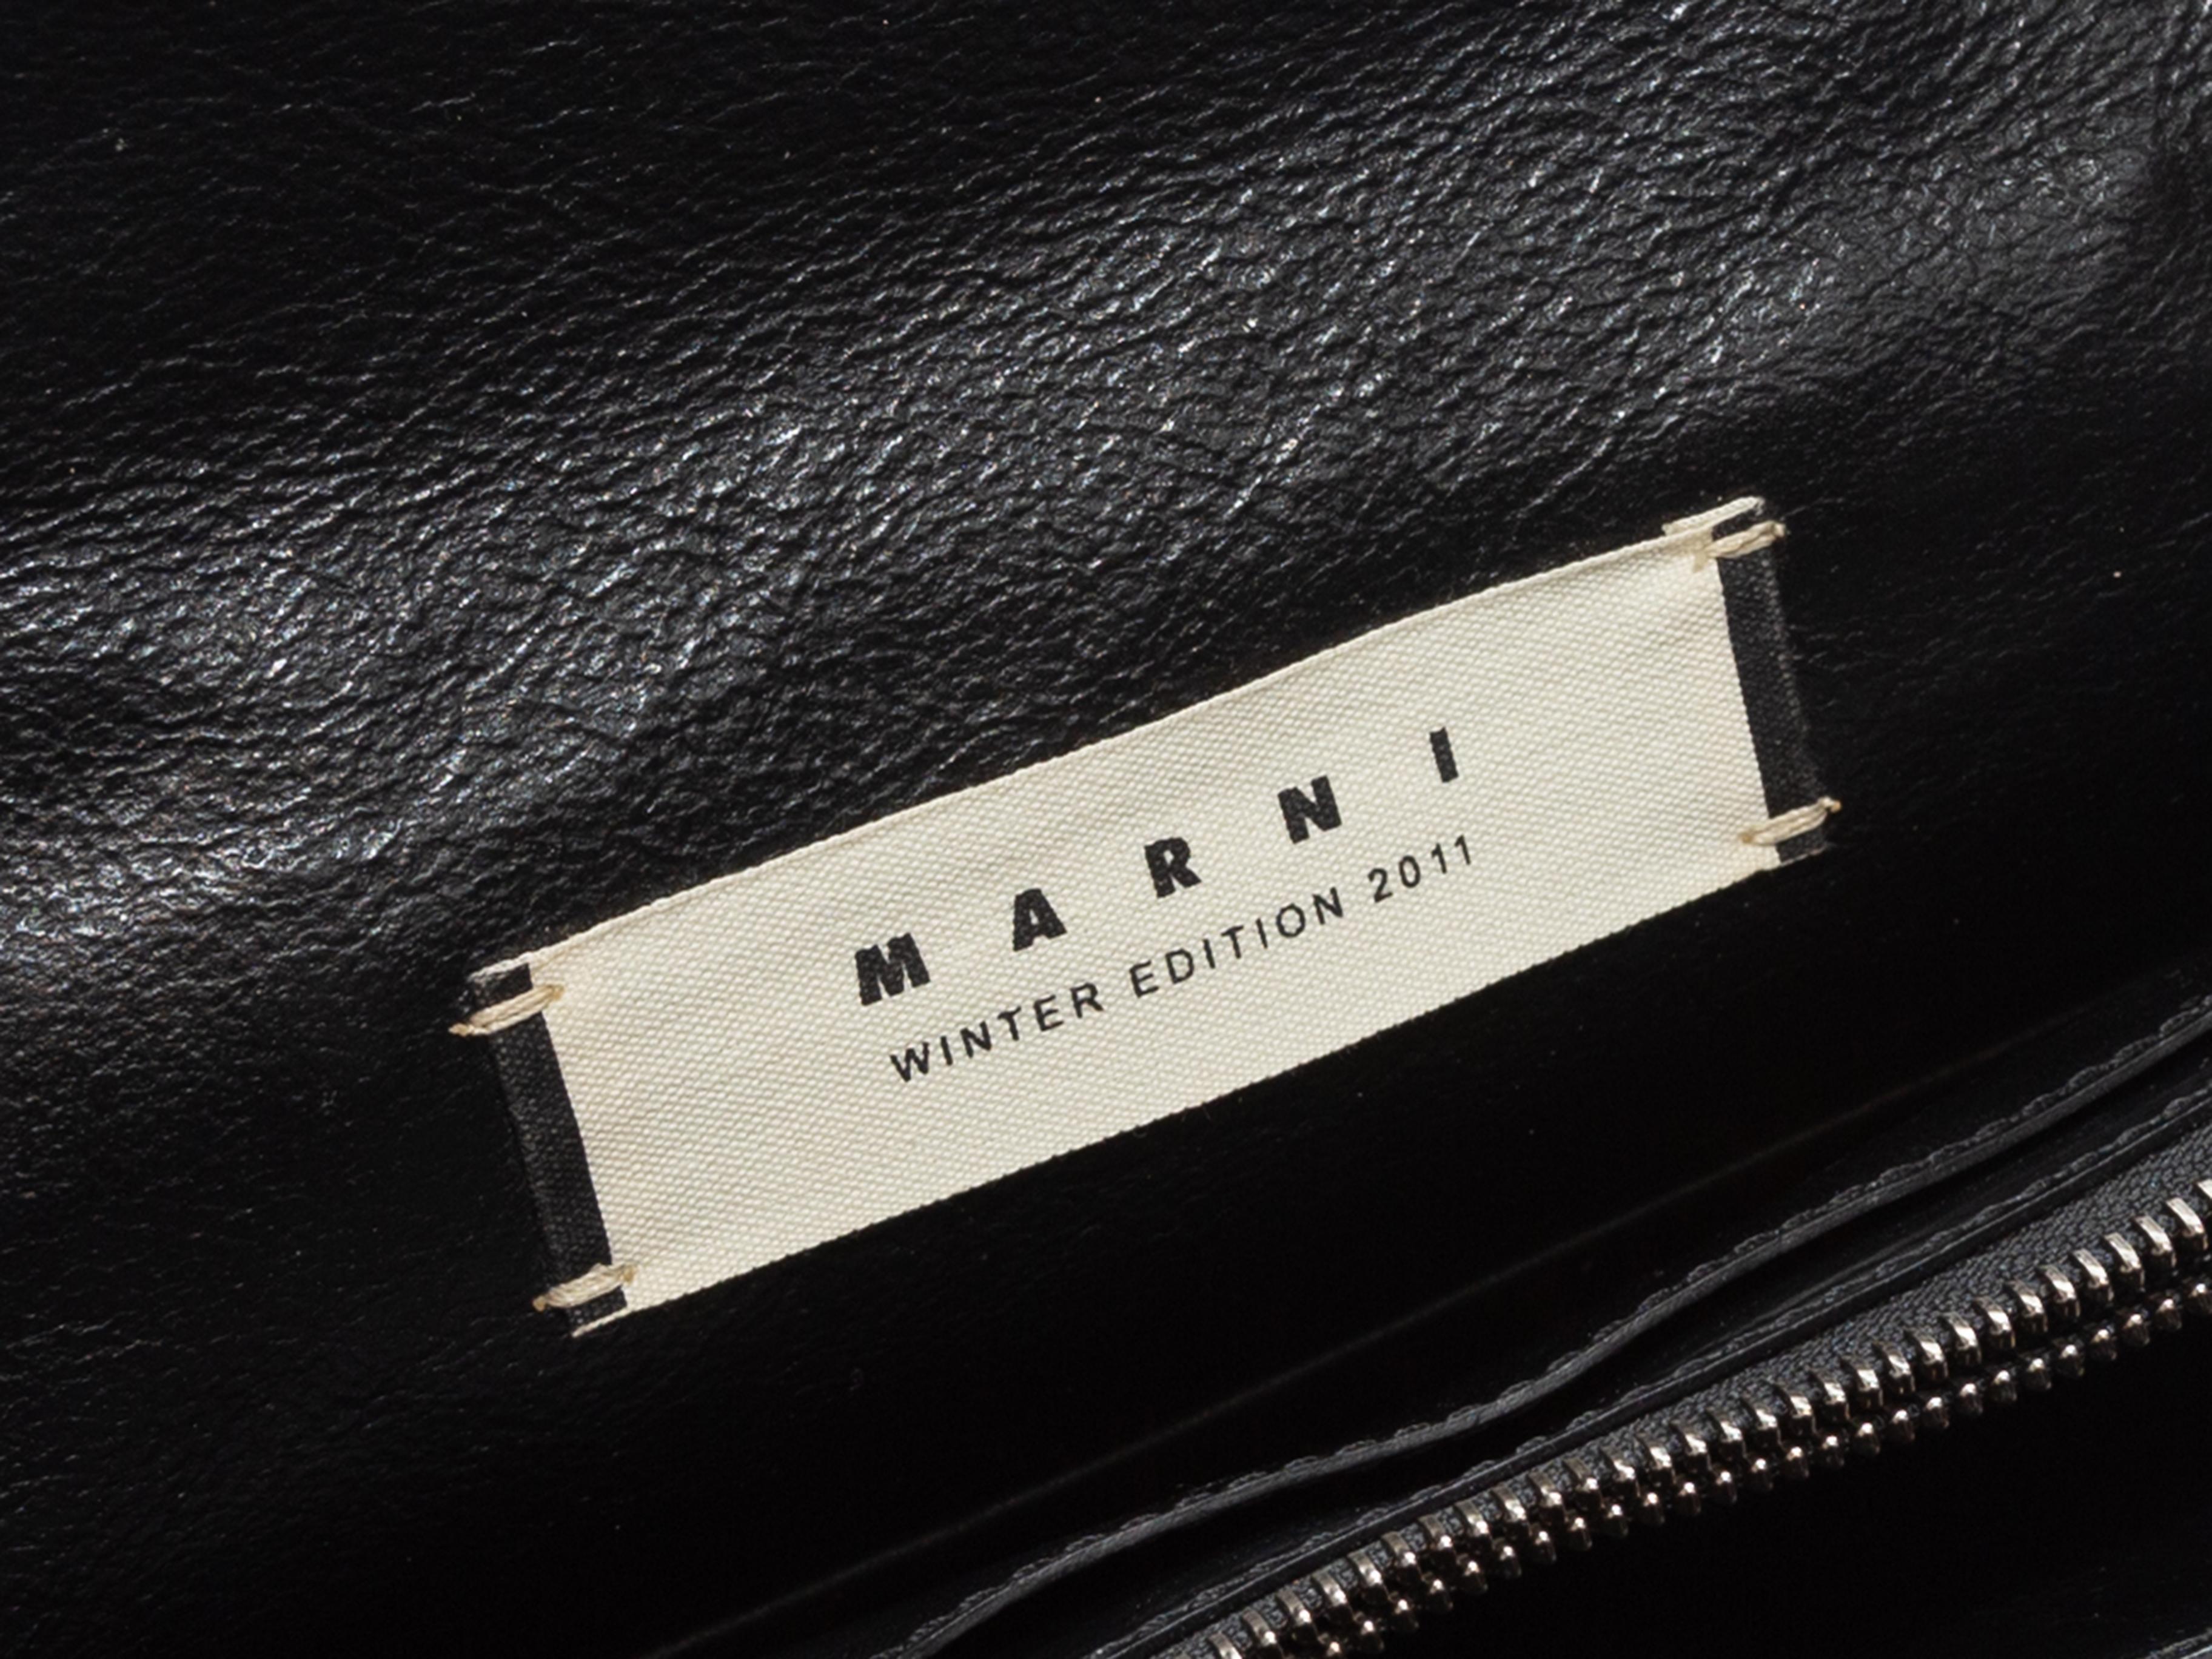 Product details: Black leather handbag by Marni. From the Winter 2011 Collection. Interior zip pocket. Rolled top handle. Dual turn-lock closures at front flap. 10